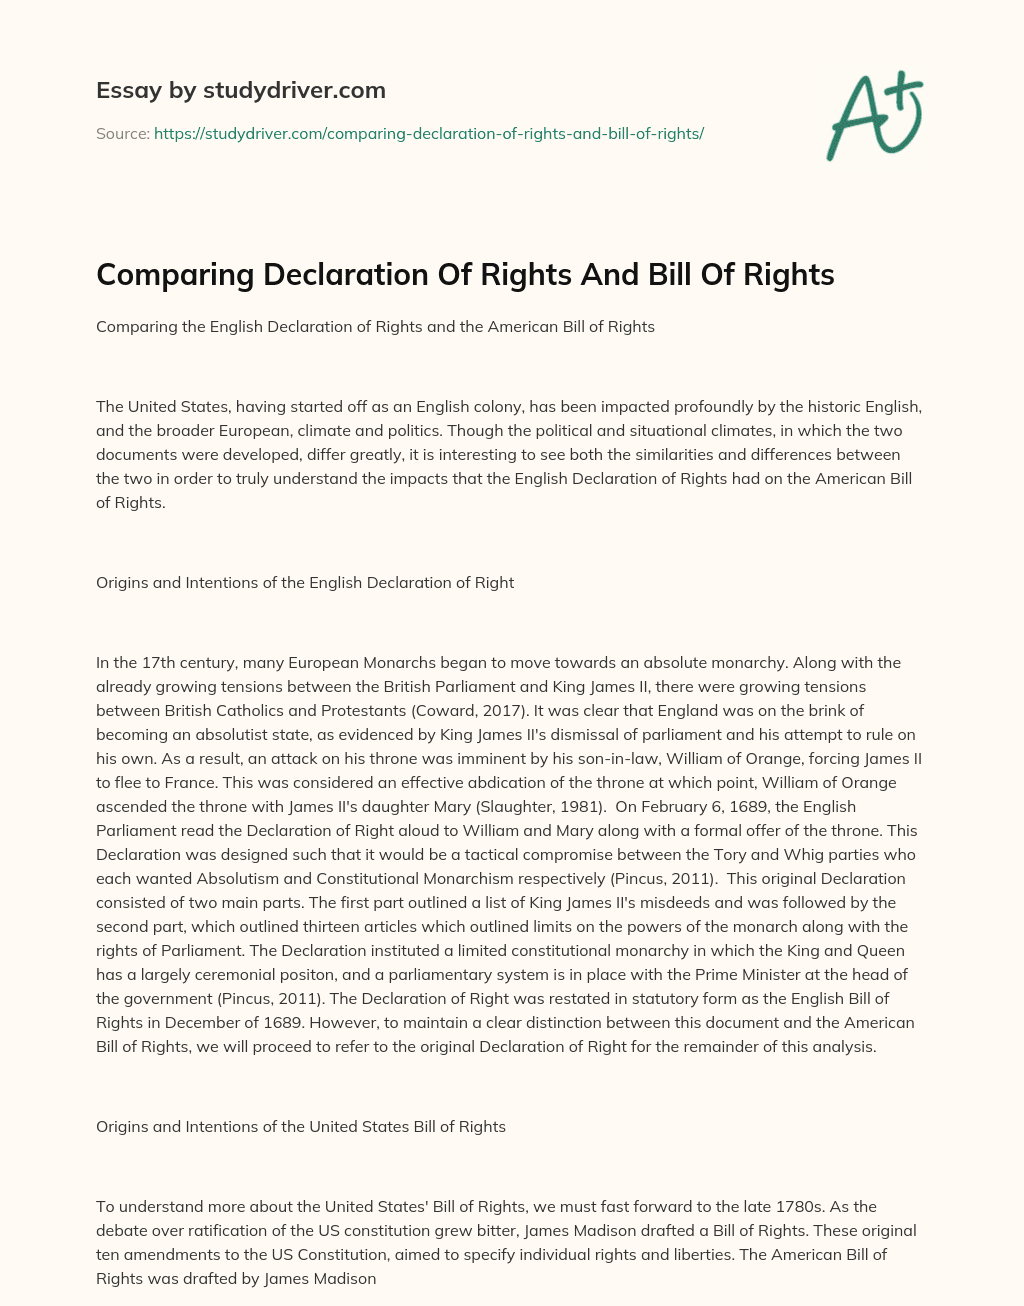 Comparing Declaration of Rights and Bill of Rights essay